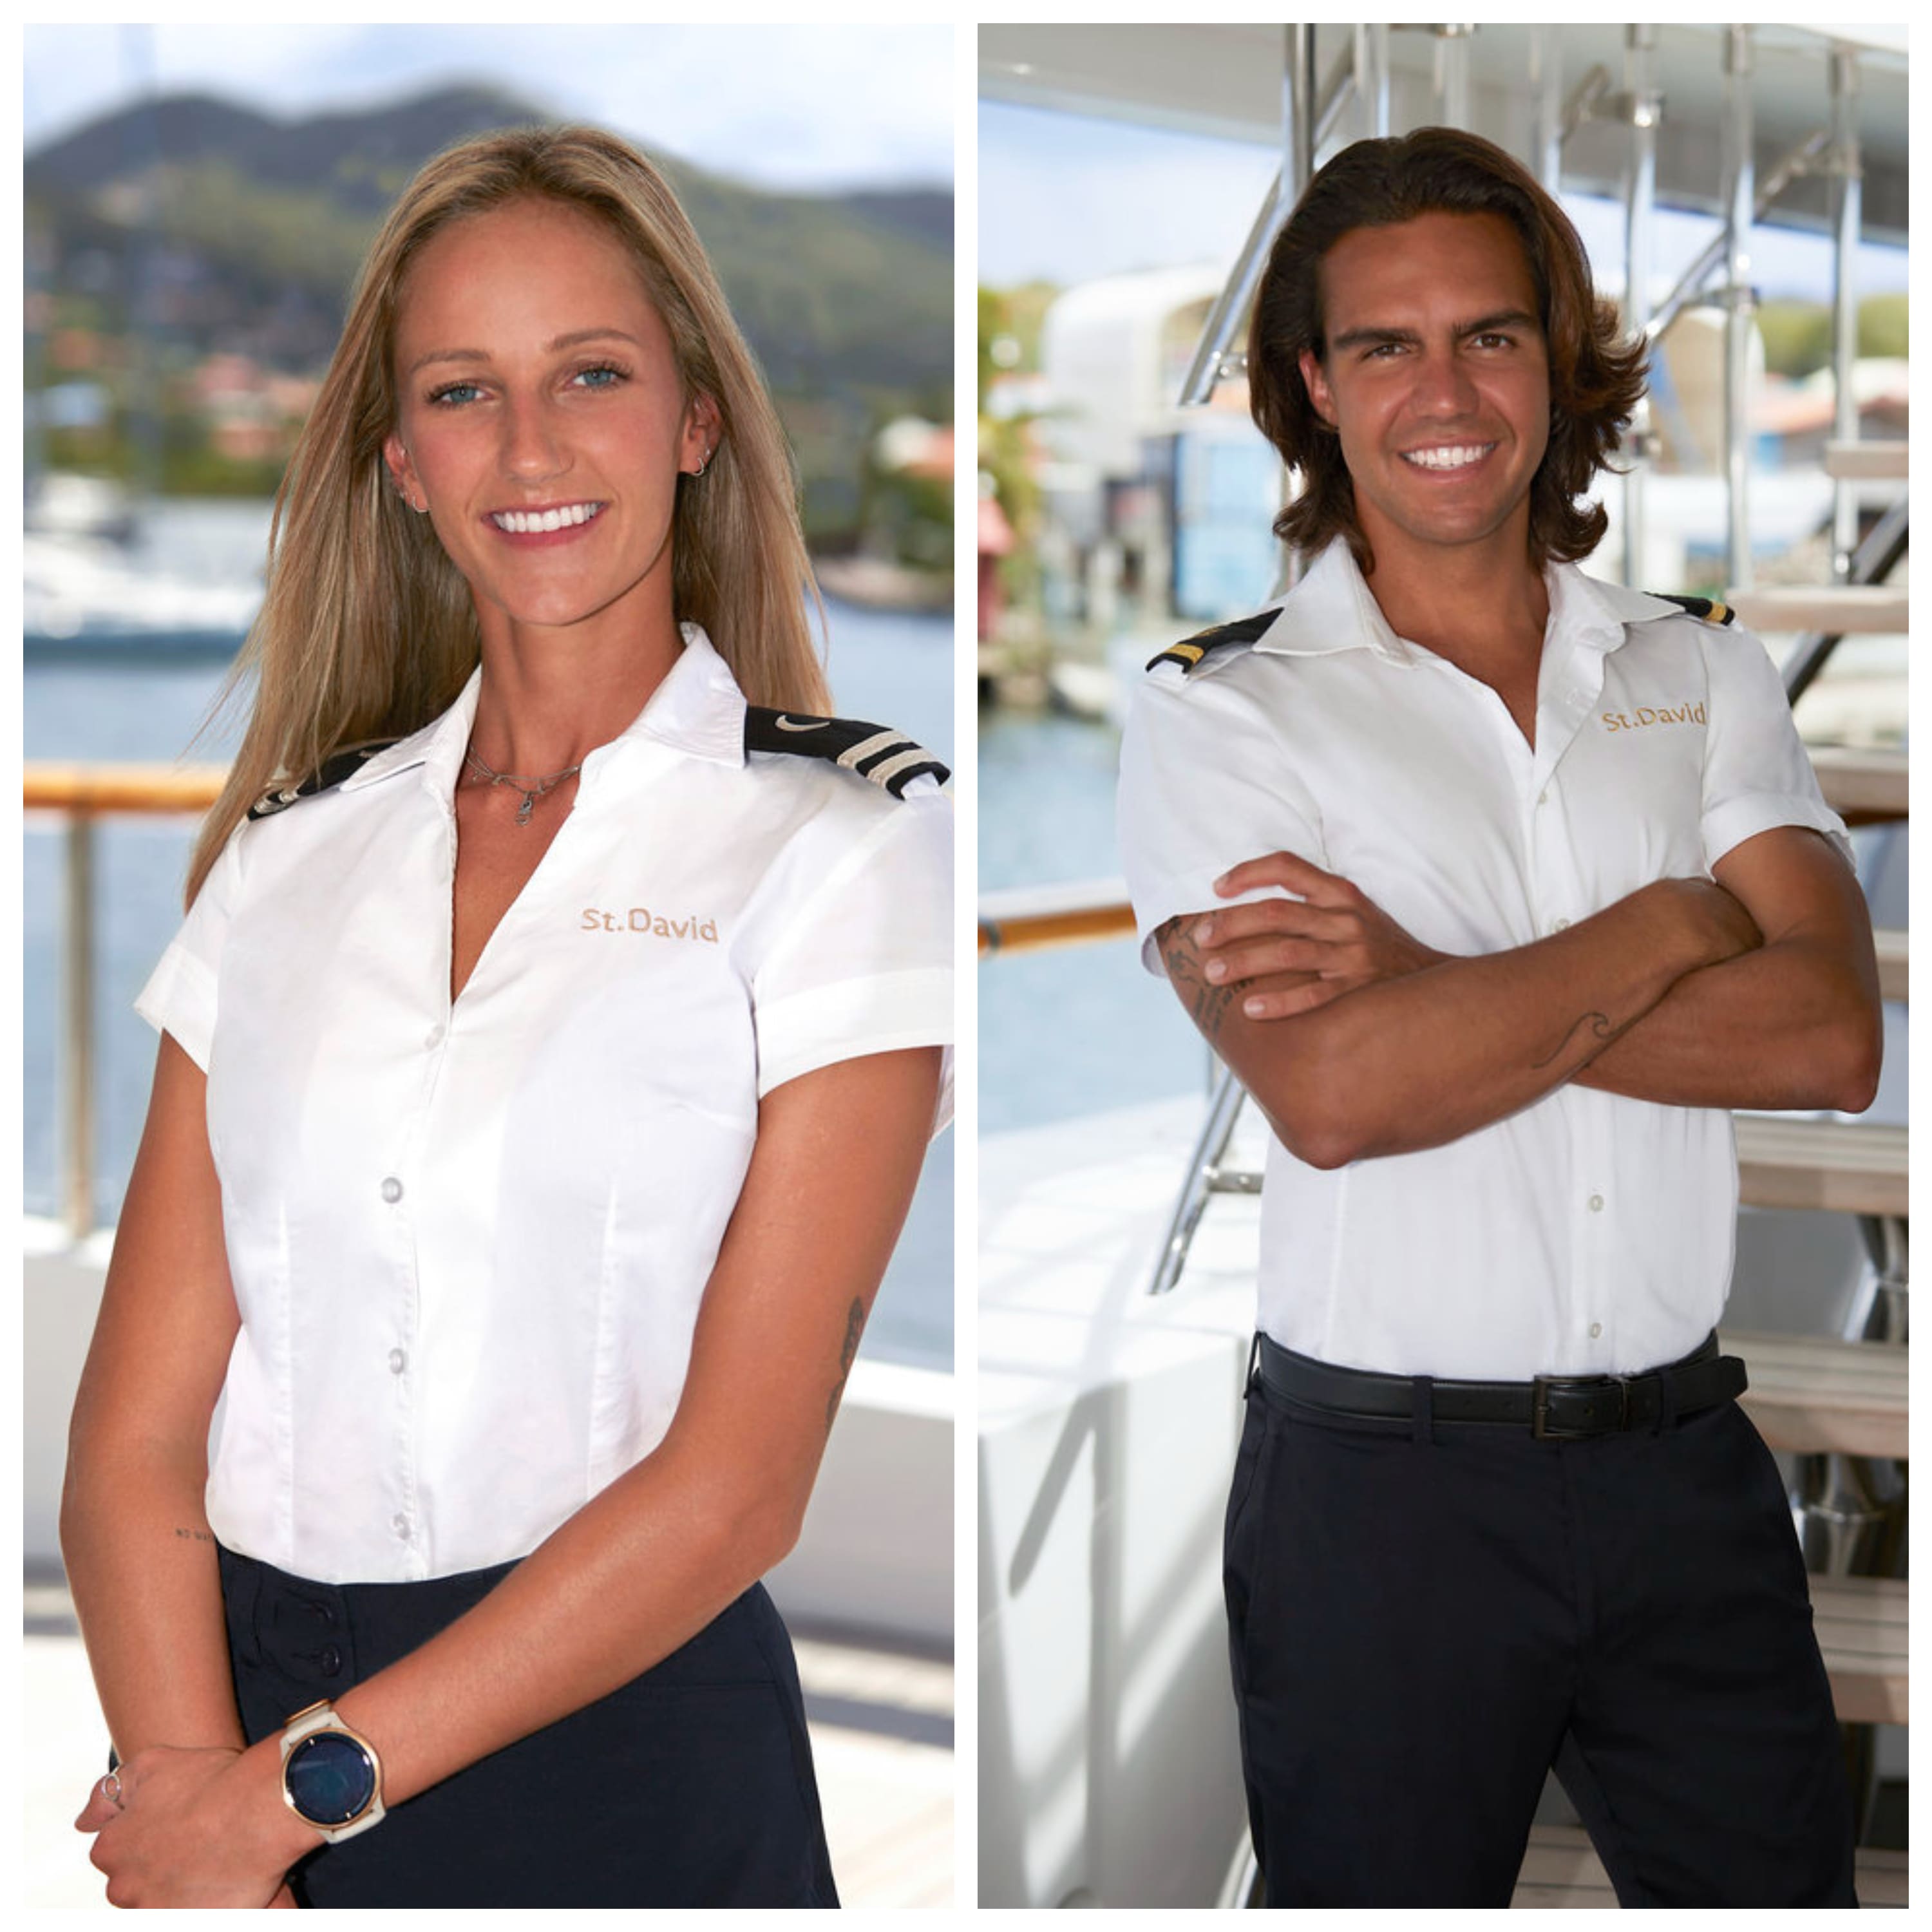 Leigh-Ann Smith and Ben Willoughby from 'Below Deck' cast photos